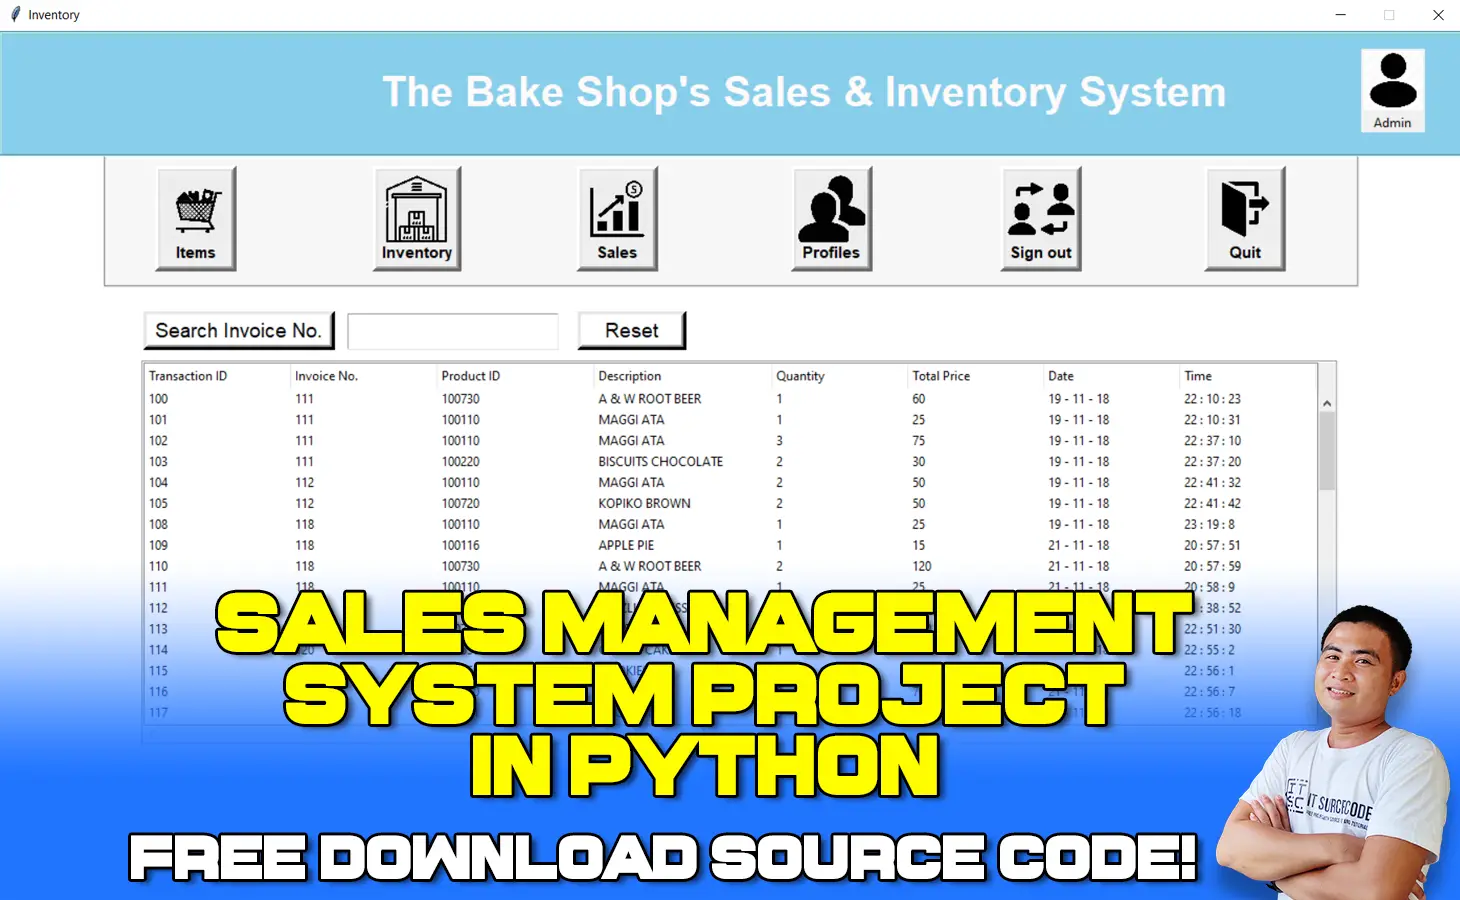 Sales Management System Project in Python with Source Code